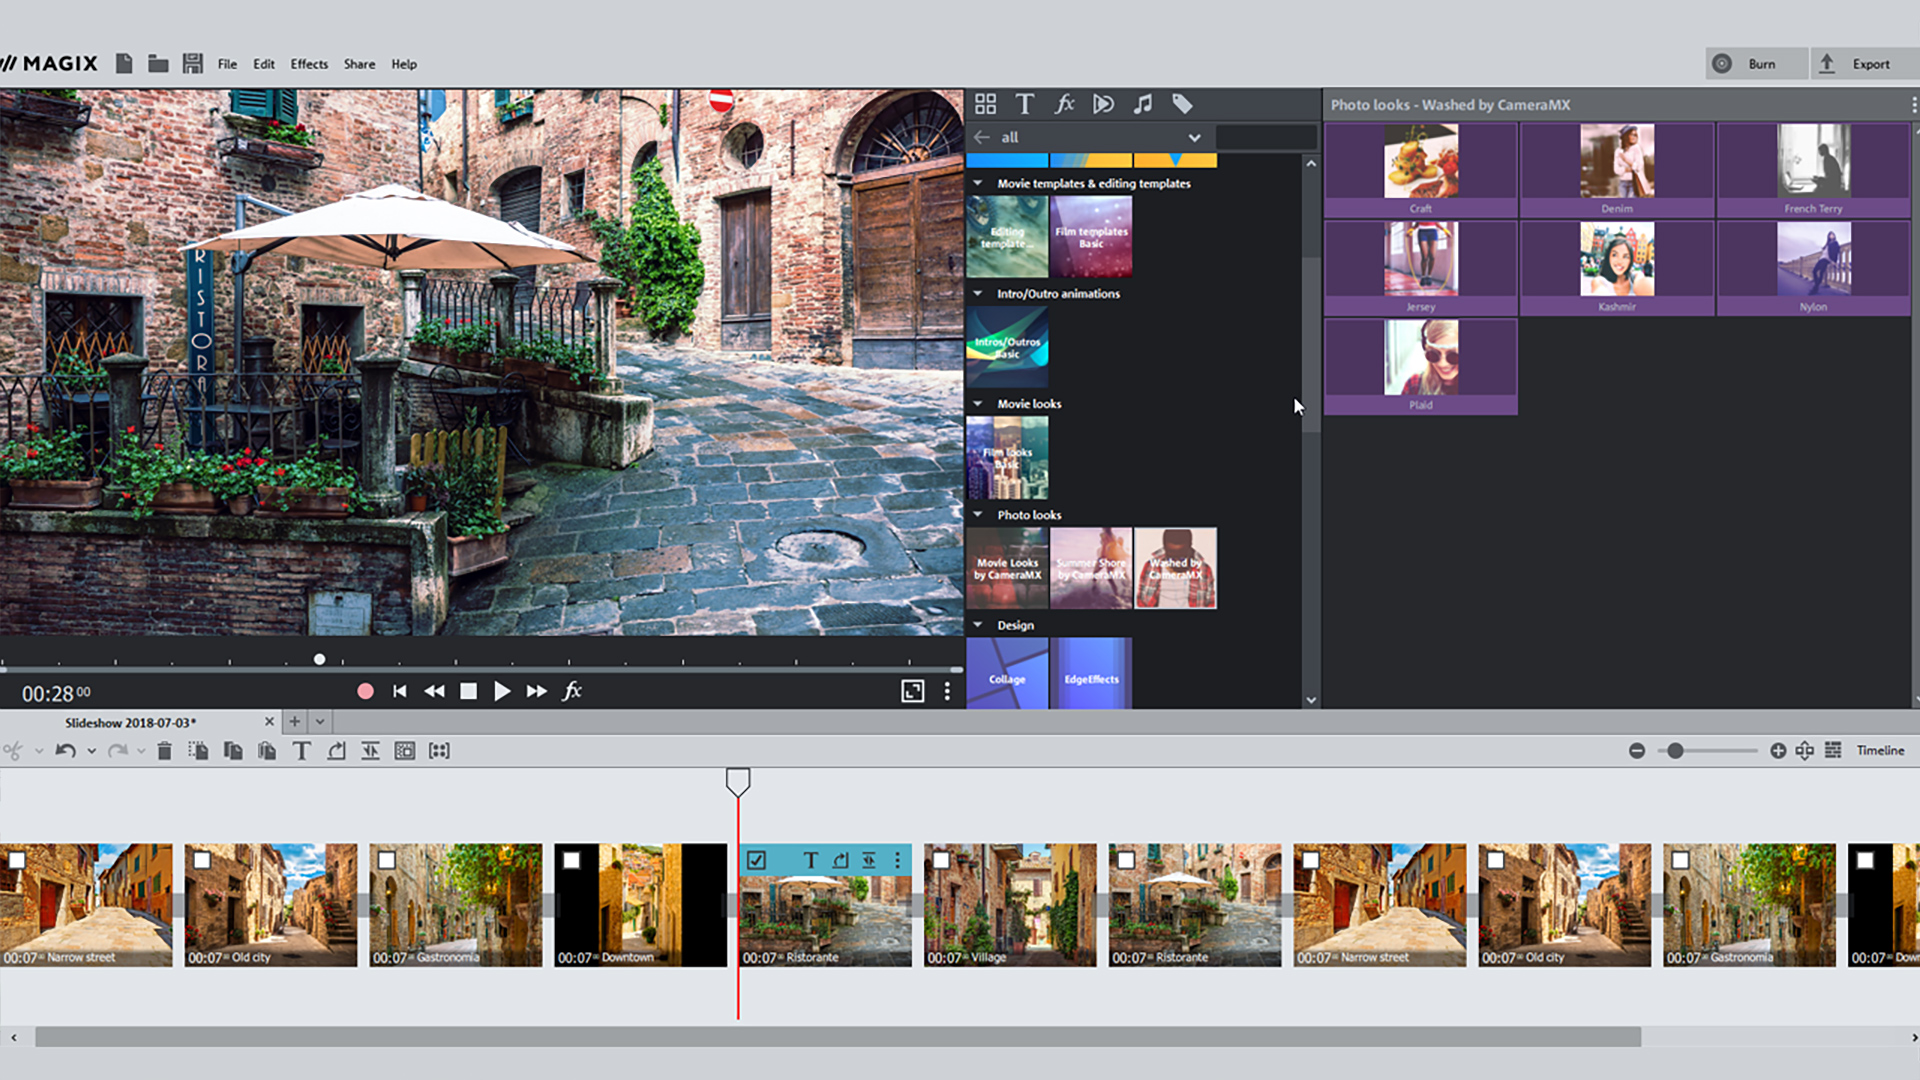 magix photostory deluxe 2018 serial